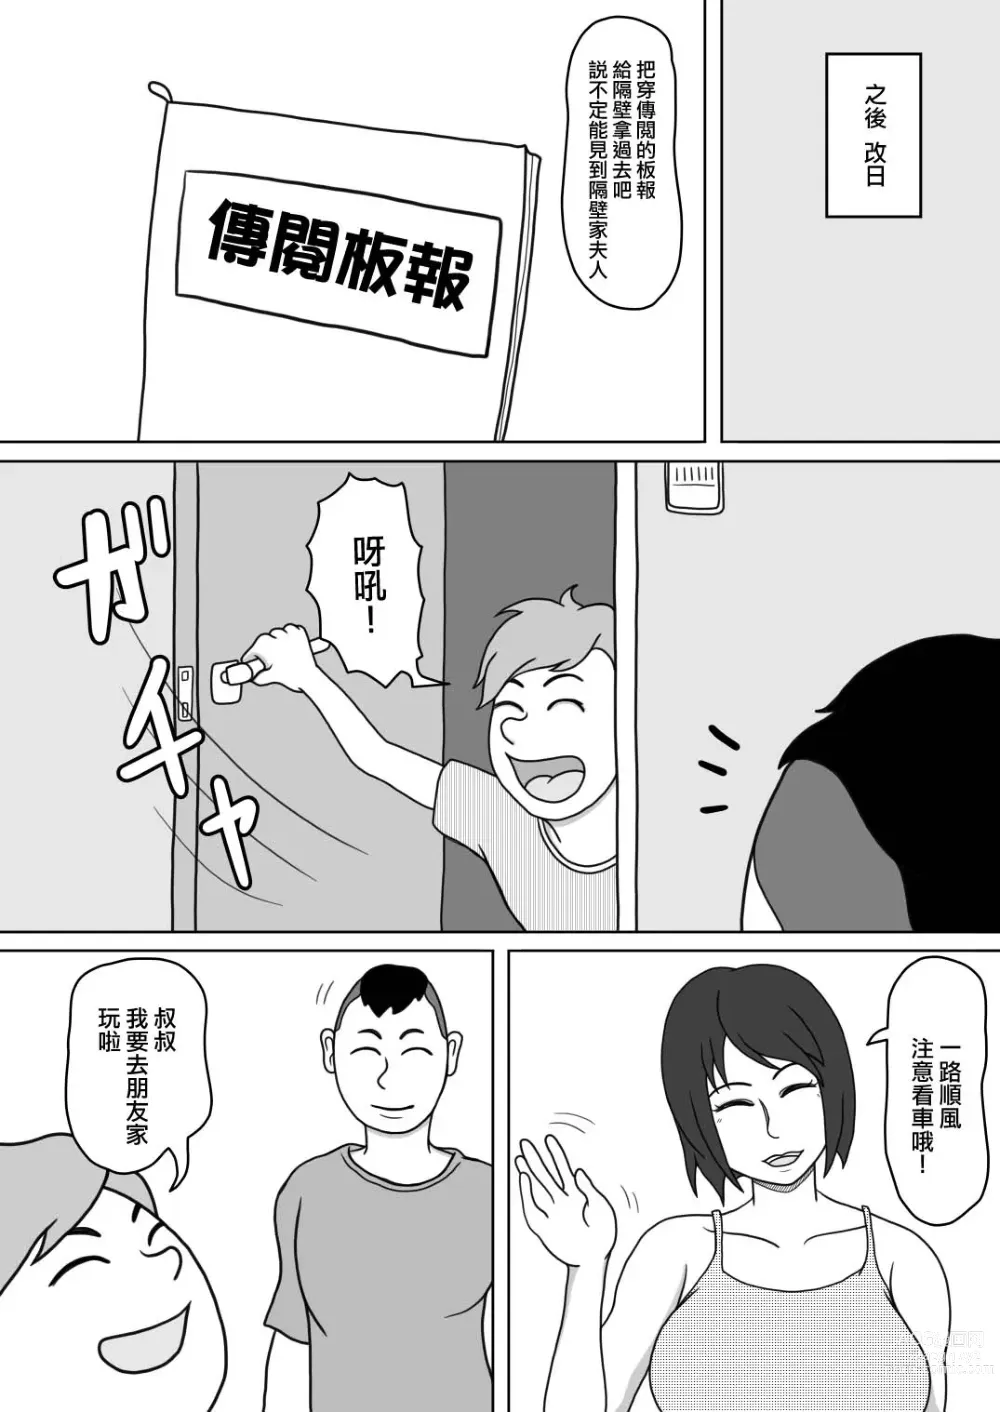 Page 7 of doujinshi 201號房的鄰居